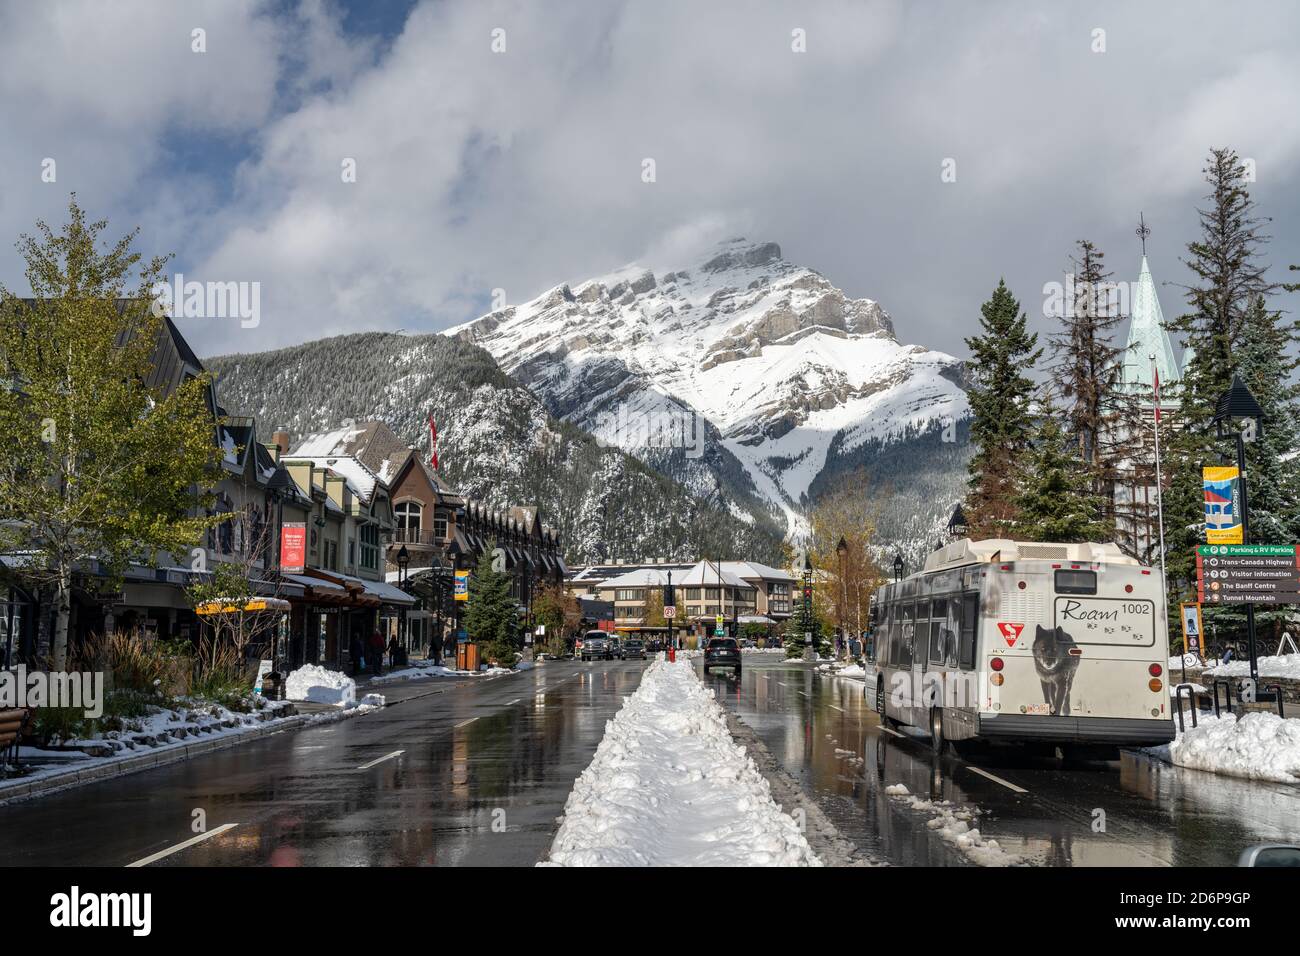 Street view of Town of Banff. Bus stop in Banff Avenue in autumn and winter snowy season. Banff, Alberta, Canada Stock Photo